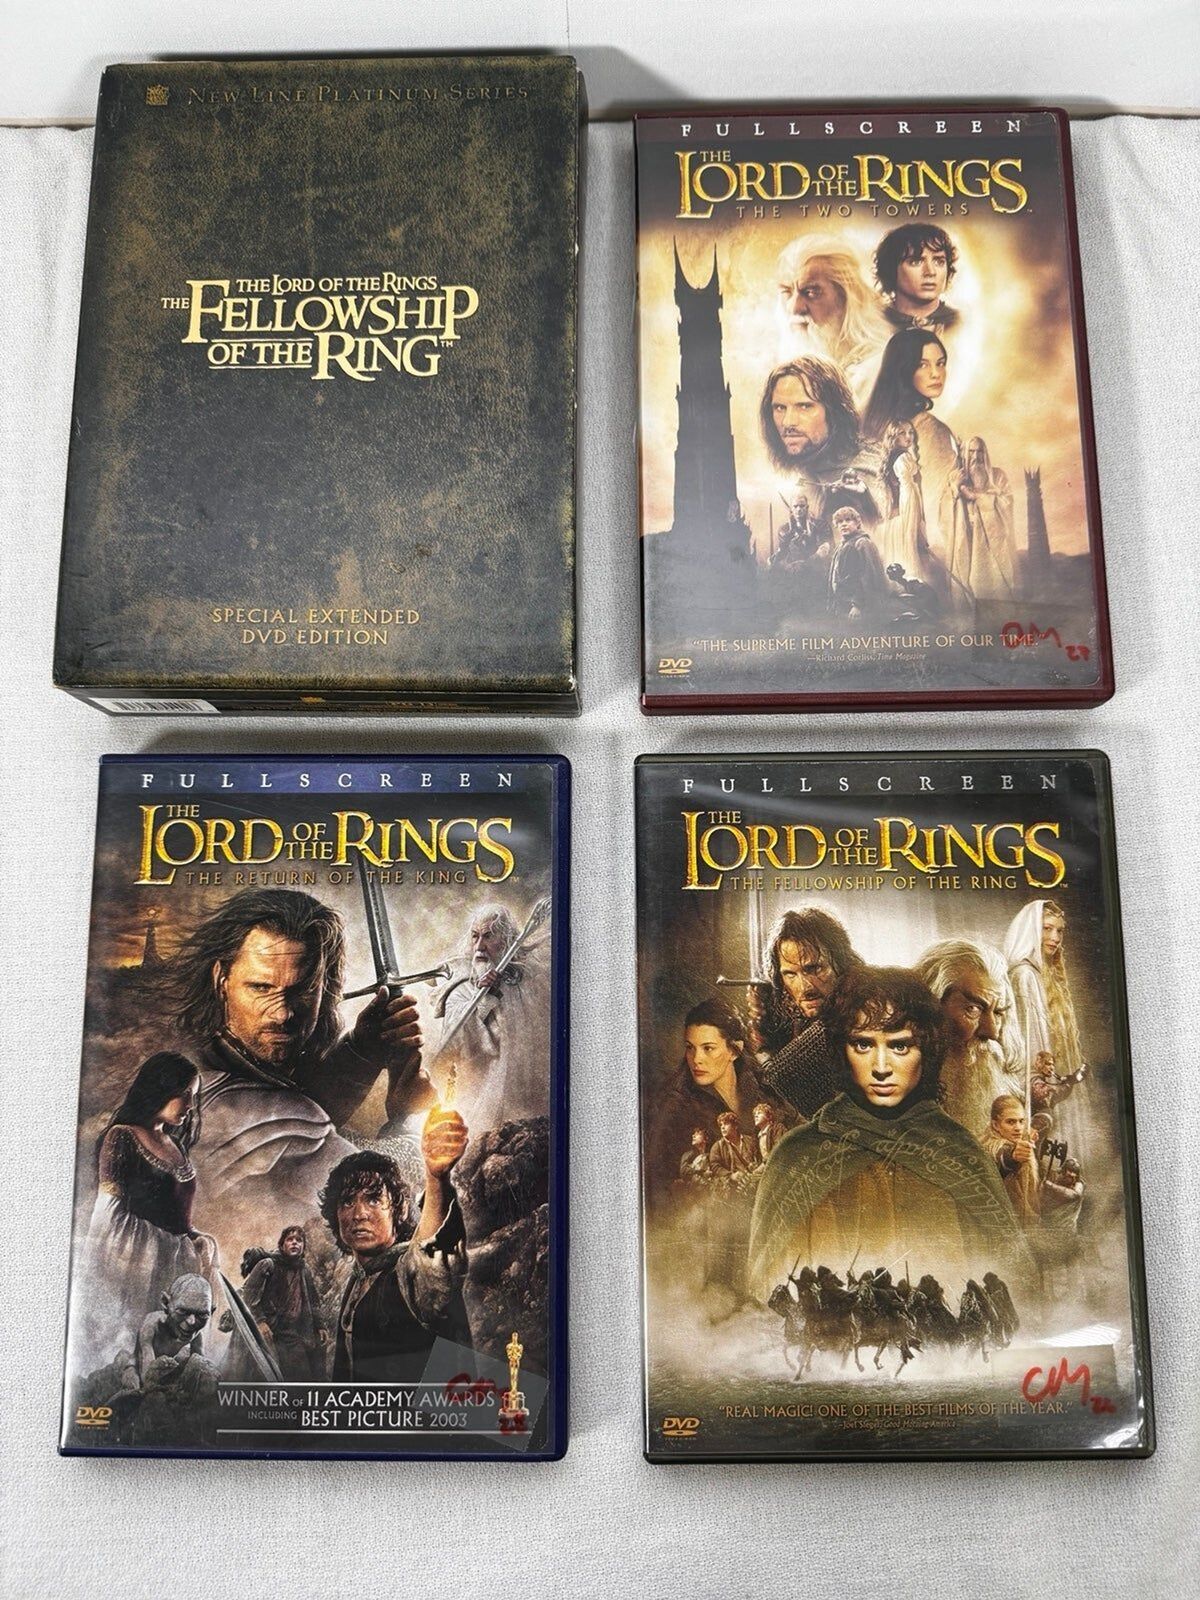 The Lord of the Rings DVD Bundle Set